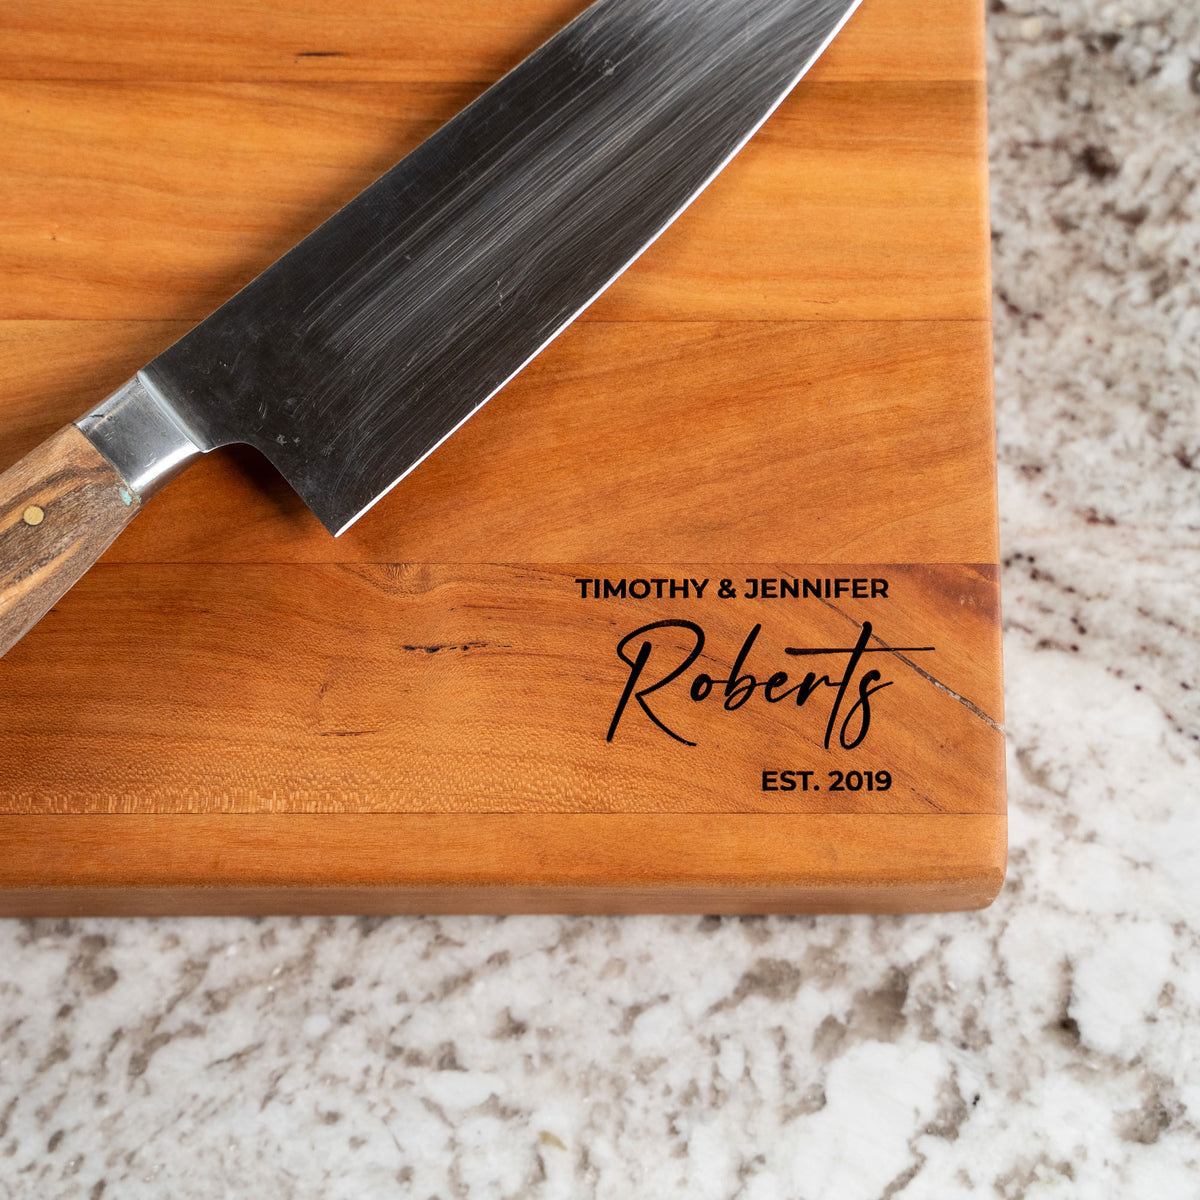 American Maple Wood Butcher Block Cutting Board, Small - 13.5in x 13.5in / Remove Handles (-$5.00)at Holtz Leather